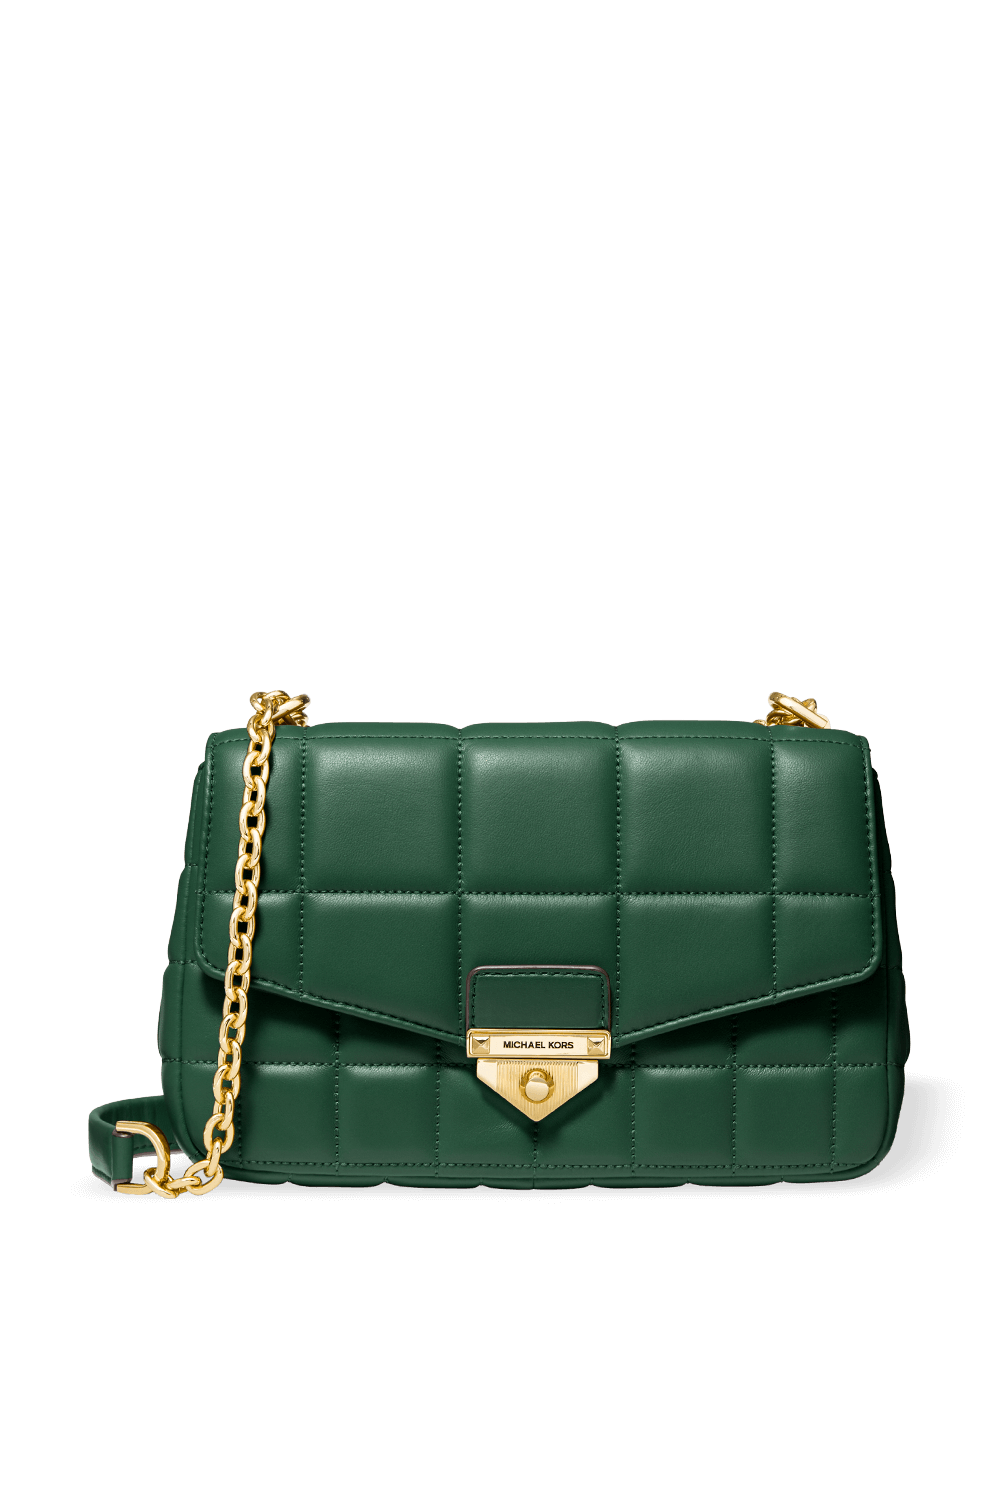 Soho LG Quilted Leather Shoulder Bag in Moss MICHAEL KORS